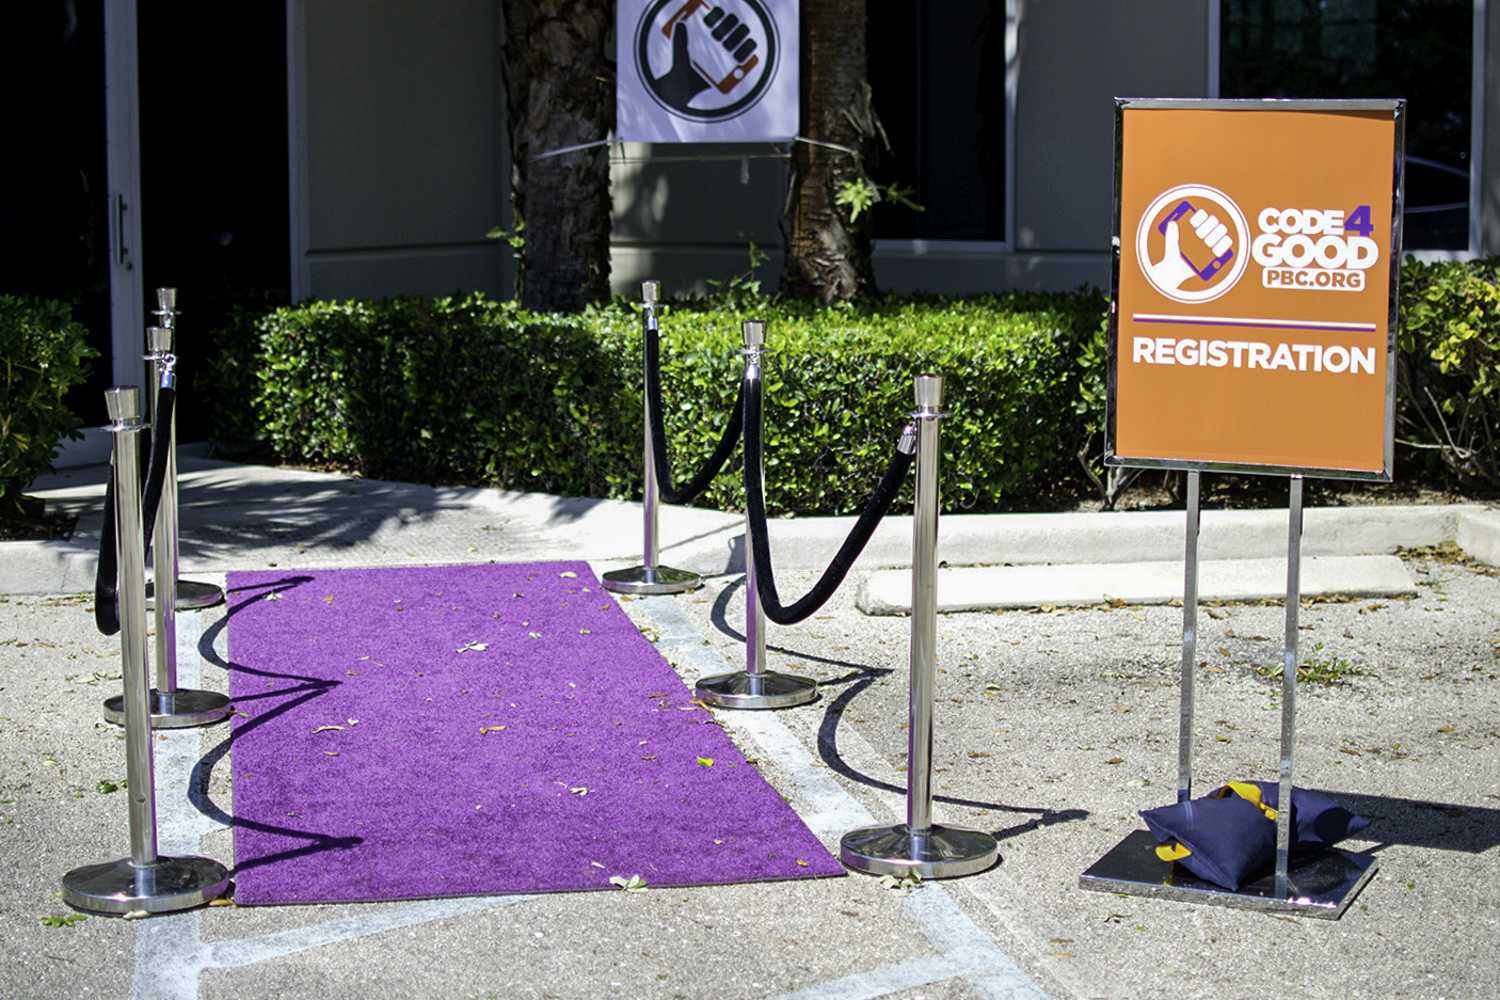 The purple carpet was rolled out for Palm Beach County’s first hackathon. Photo by Alexis Hayward | Web Assistant 